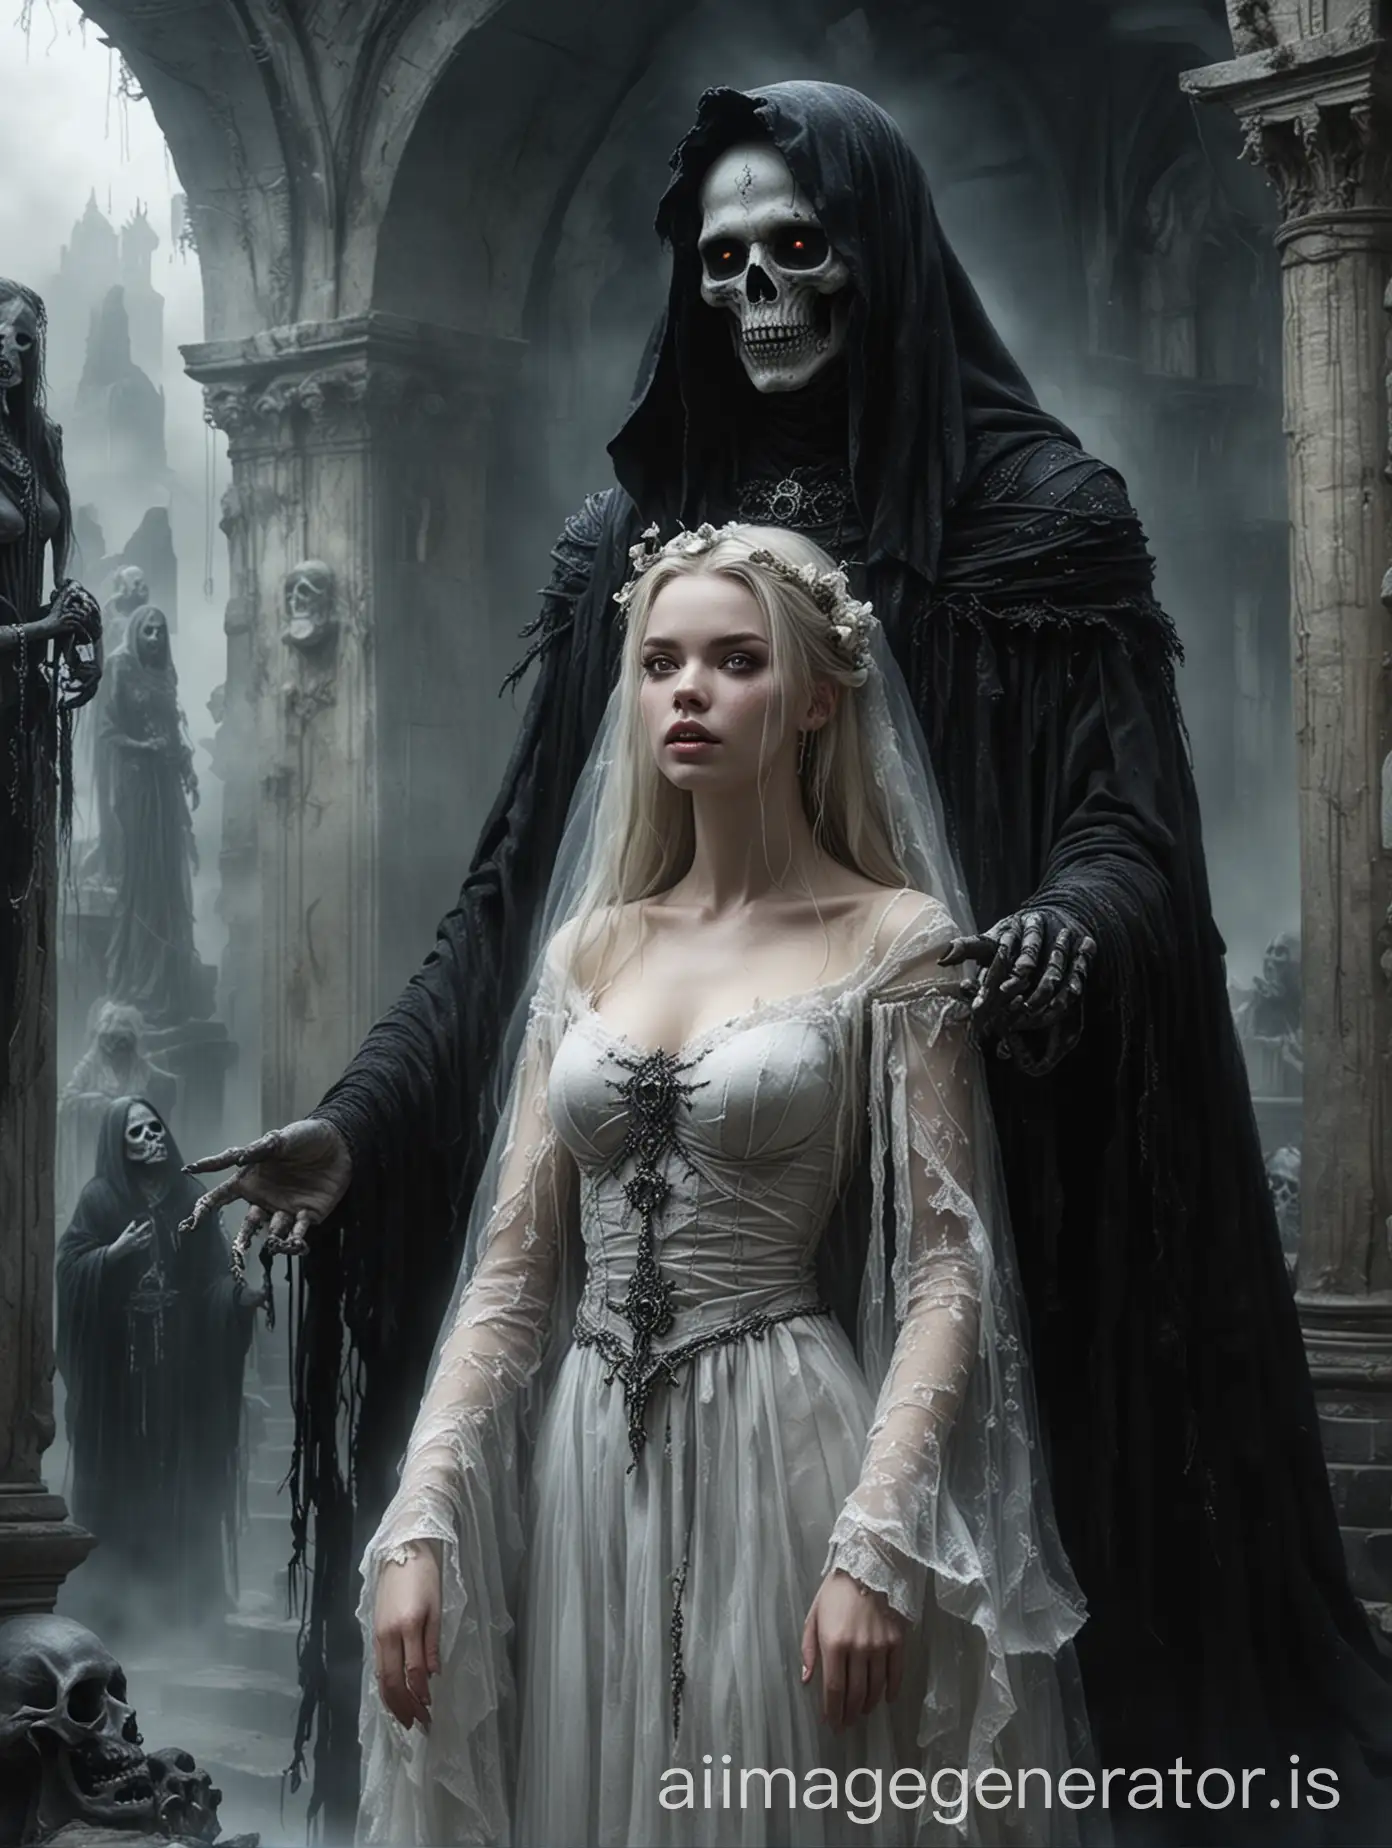 portrait, luis royo dark art style, anya taylor-joy face, woman looking up at the necromancer, wedding couple of woman and necromancer holding hands, necromancer huge creature in black robes embracing a woman, raggedy wedding dress translucent, innocent woman wedding with a demon, ancient ruins blurry foggy background